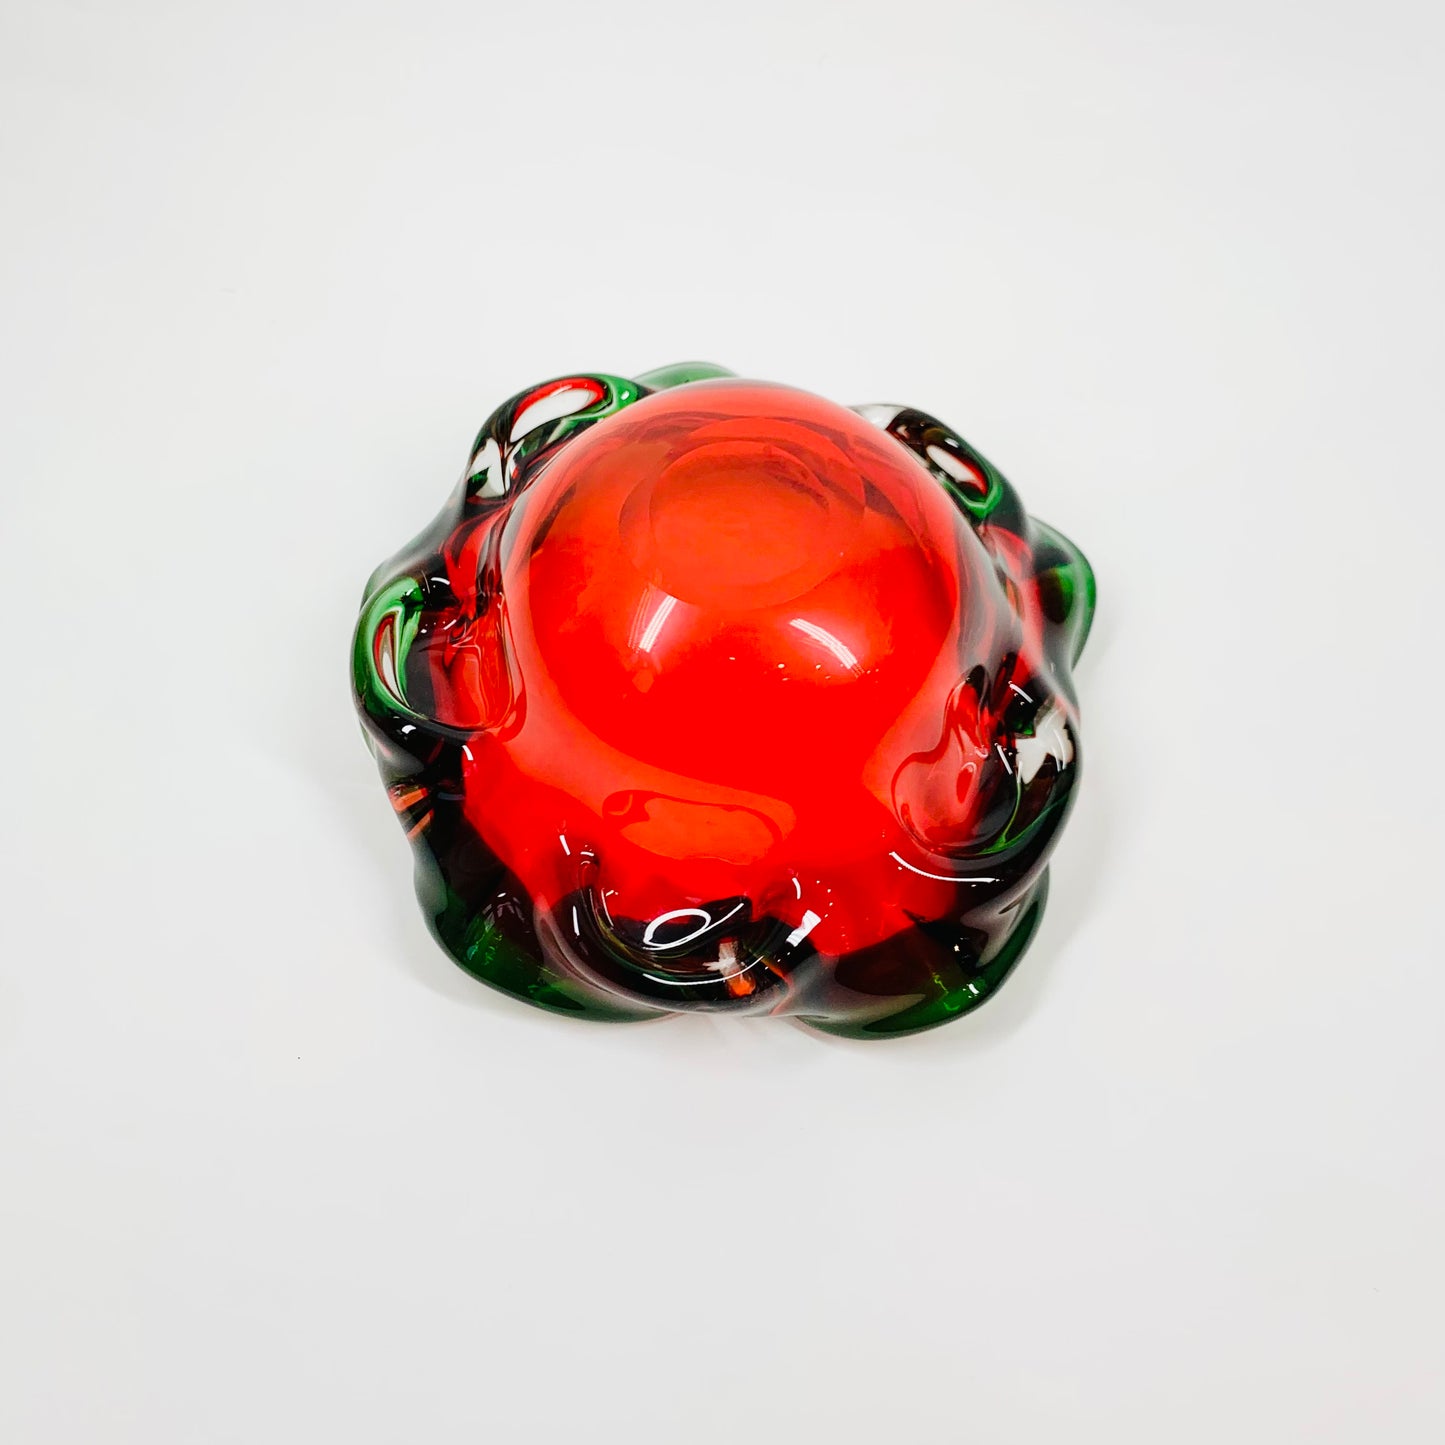 Large 1970s Japanese red ombré petal glass ashtray with green rim